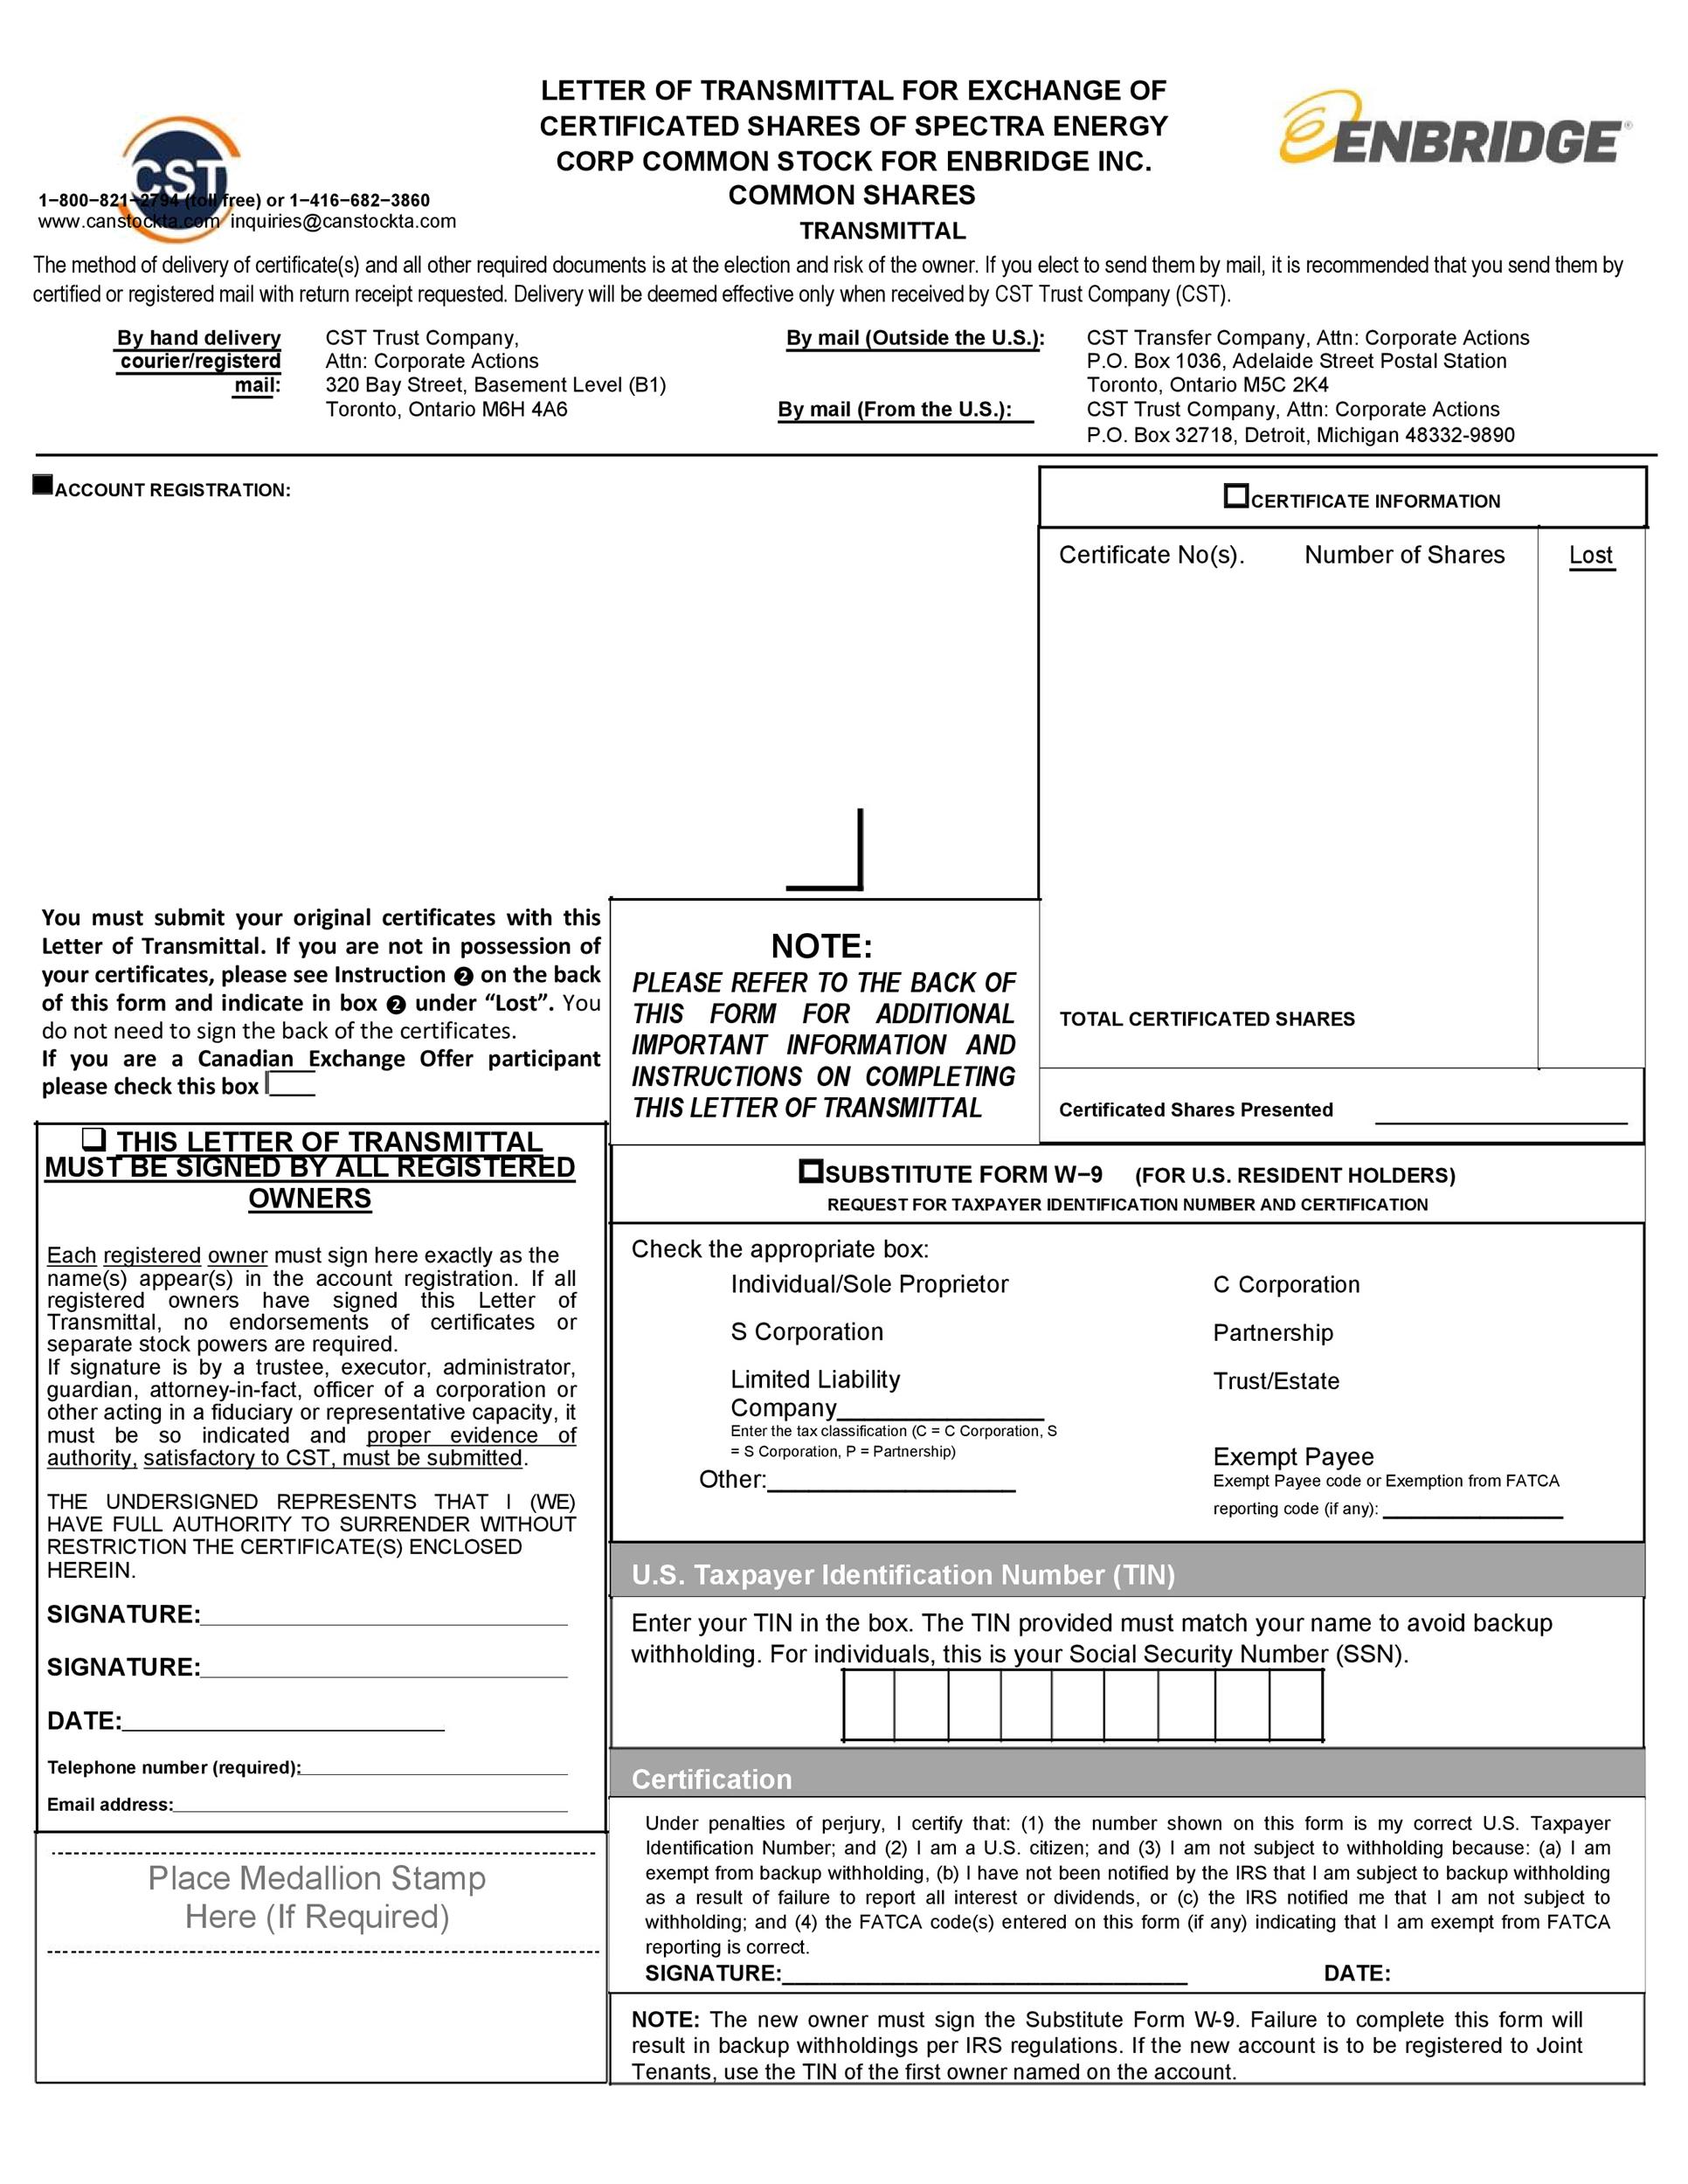 Free letter of transmittal template 30